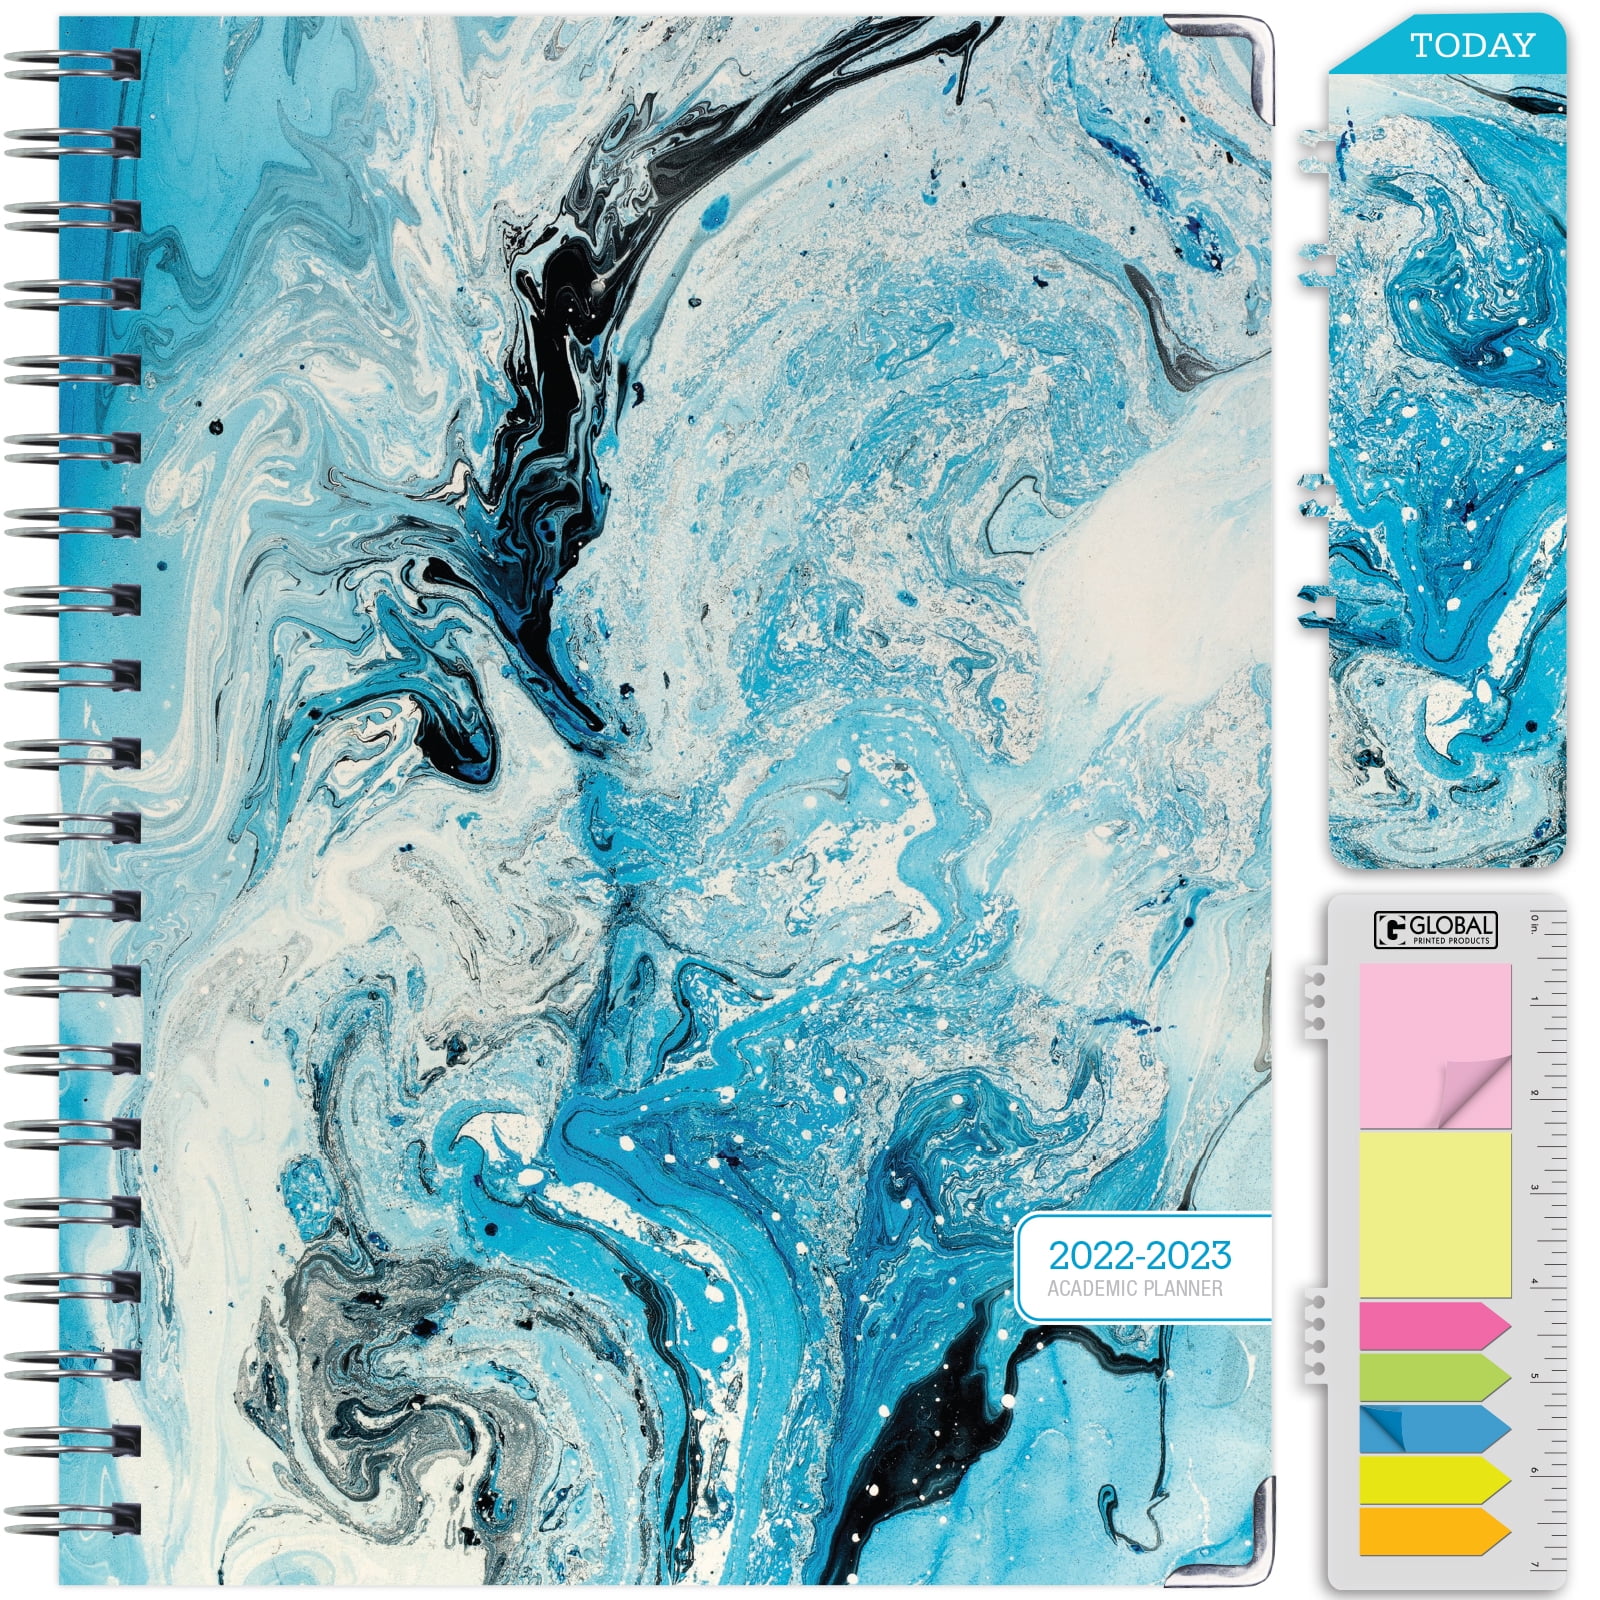 Bookmark June 2021 Through July 2022 Green Waves Pocket Folder and Sticky Note Set HARDCOVER Academic Year 2021-2022 Planner: 8.5x11 Daily Weekly Monthly Planner Yearly Agenda 